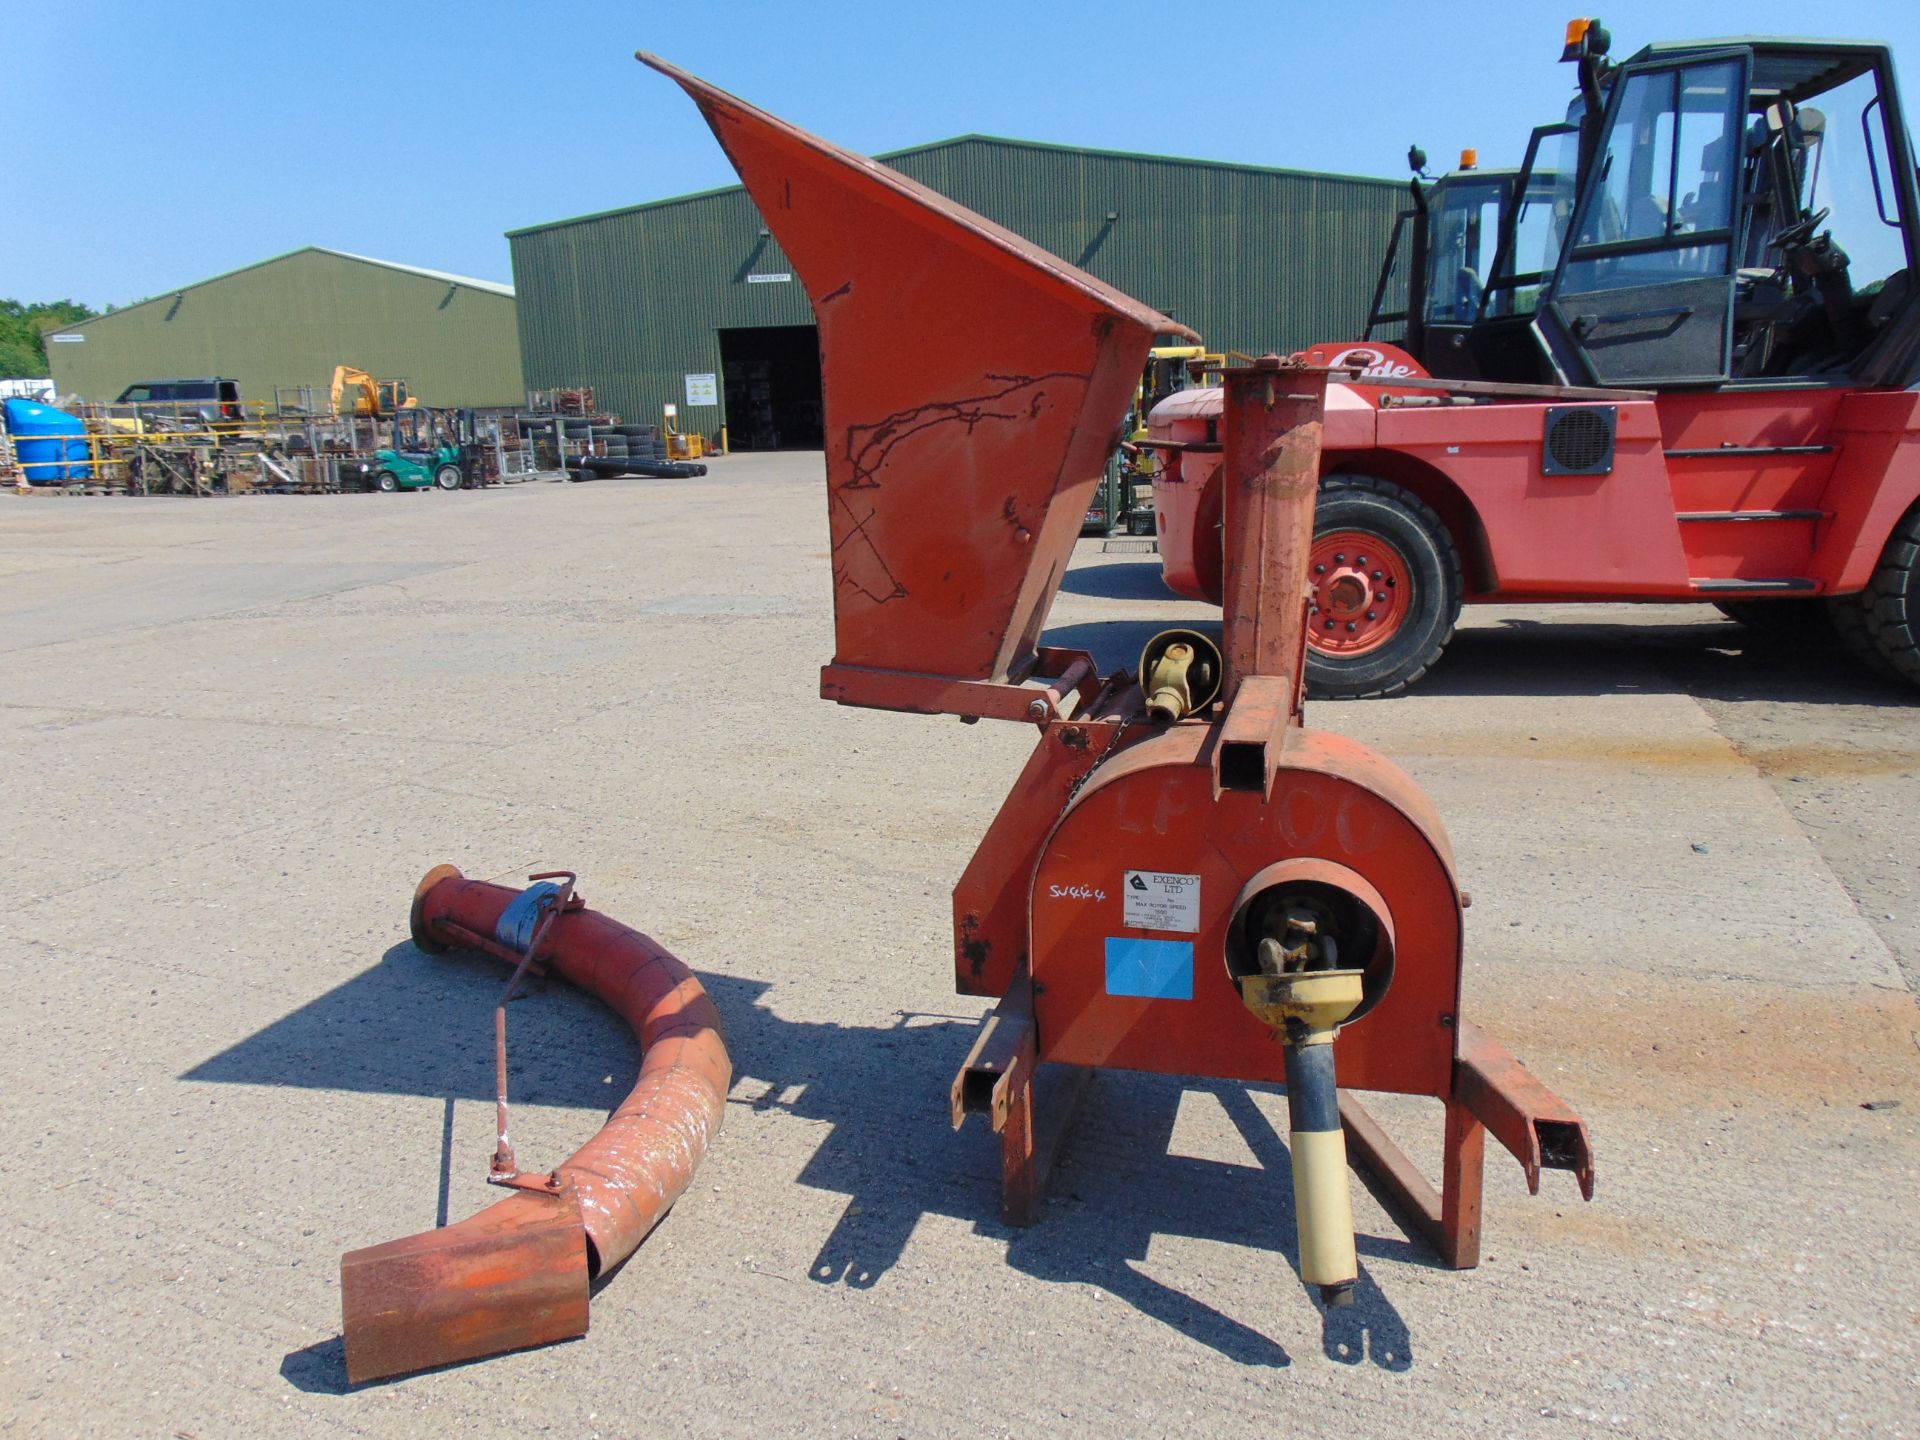 Exenco Wood Chipper 350p PTO driven with 3 point linkage